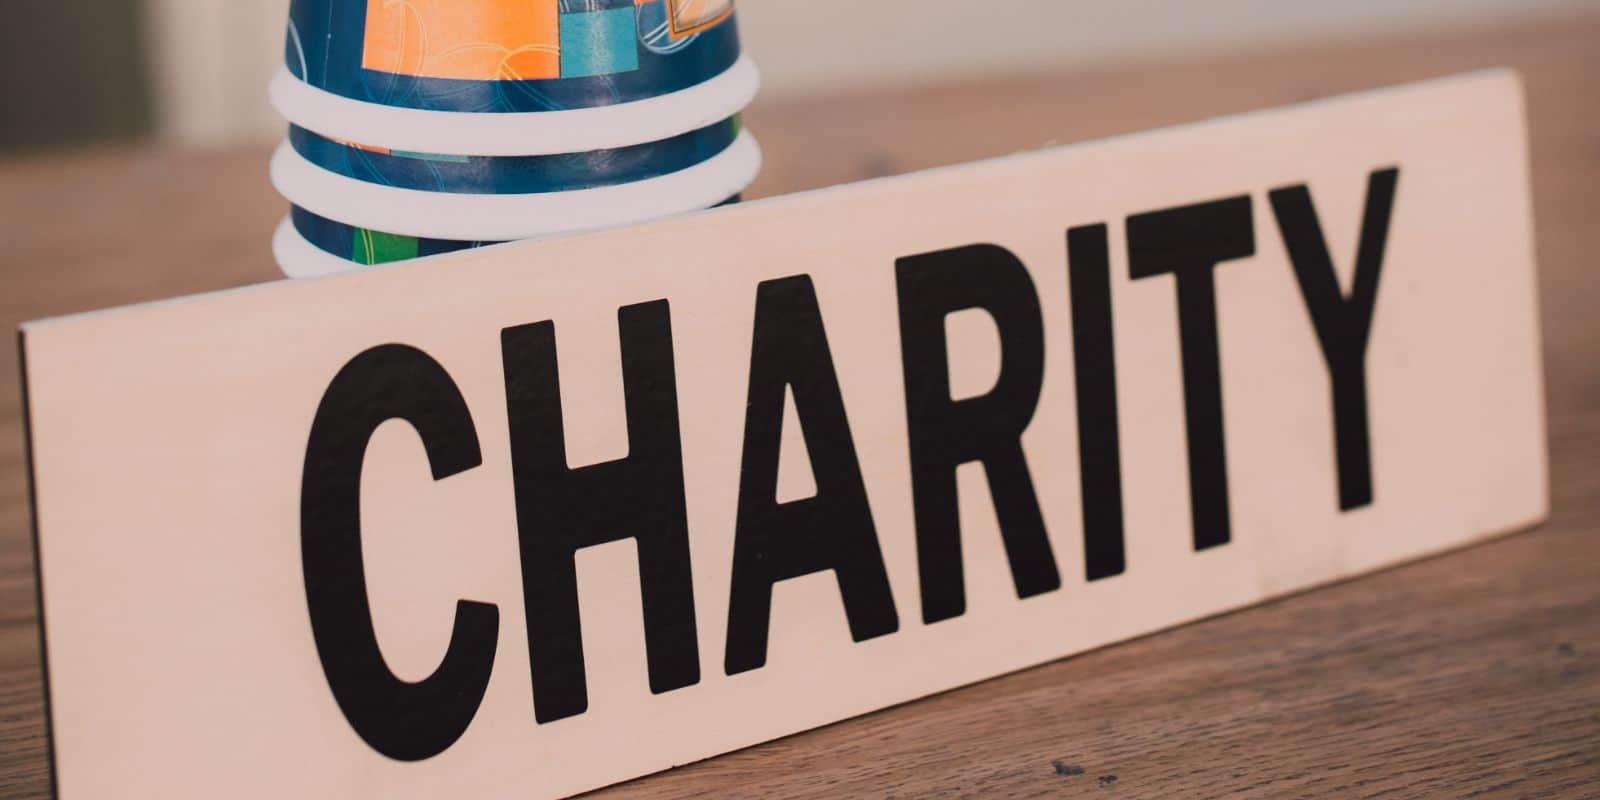 placard that says "charity" on top of the table